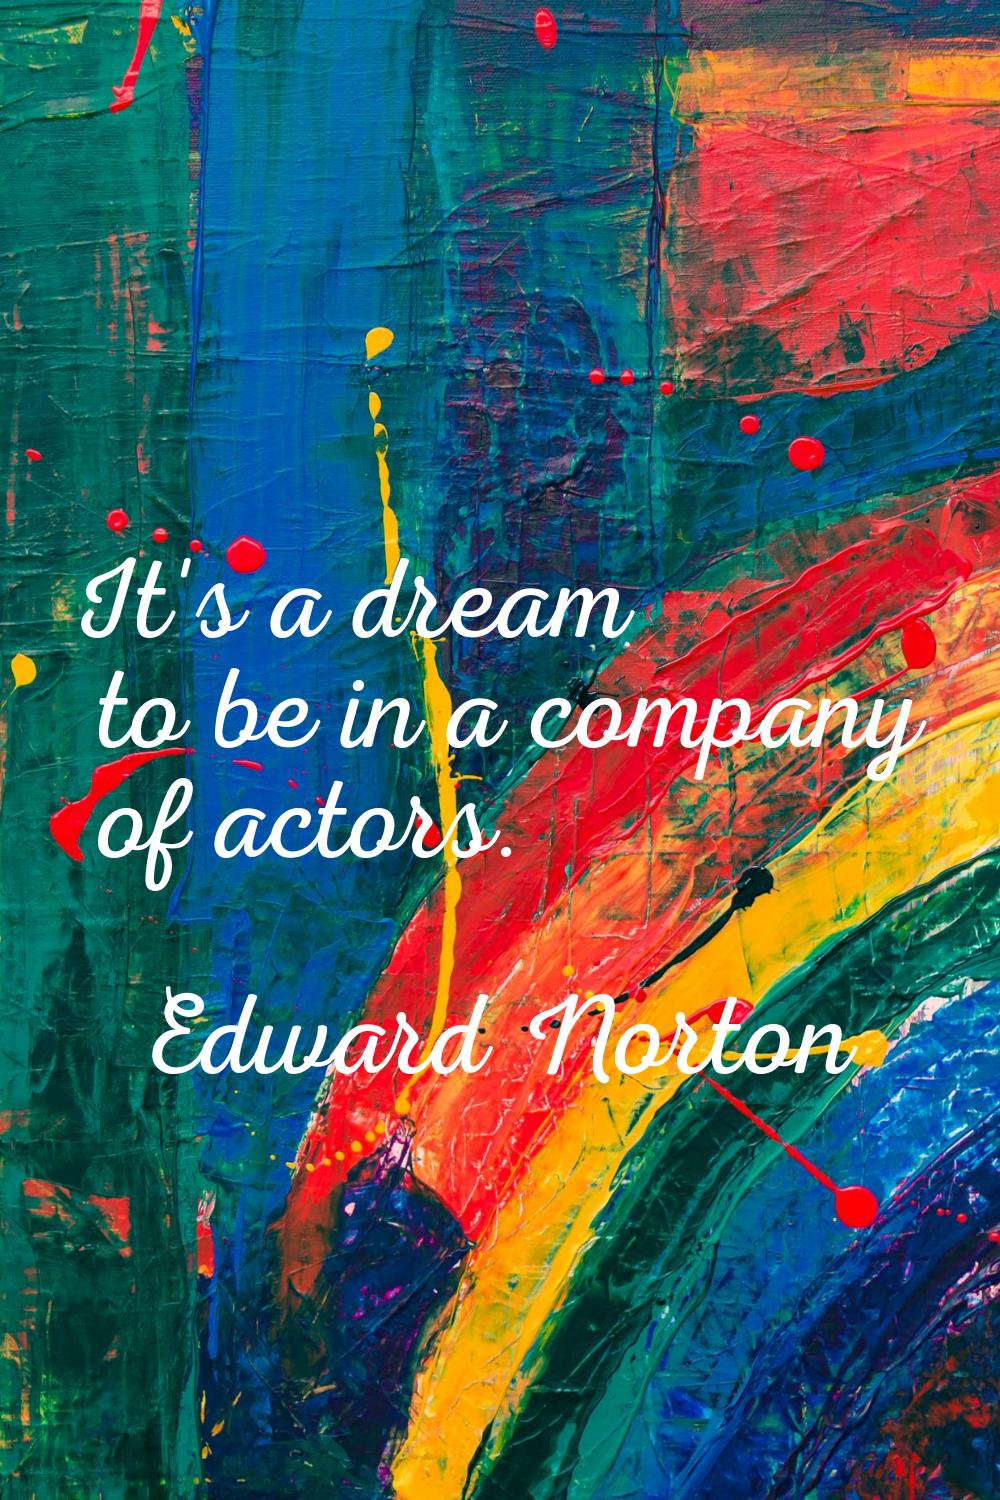 It's a dream to be in a company of actors.